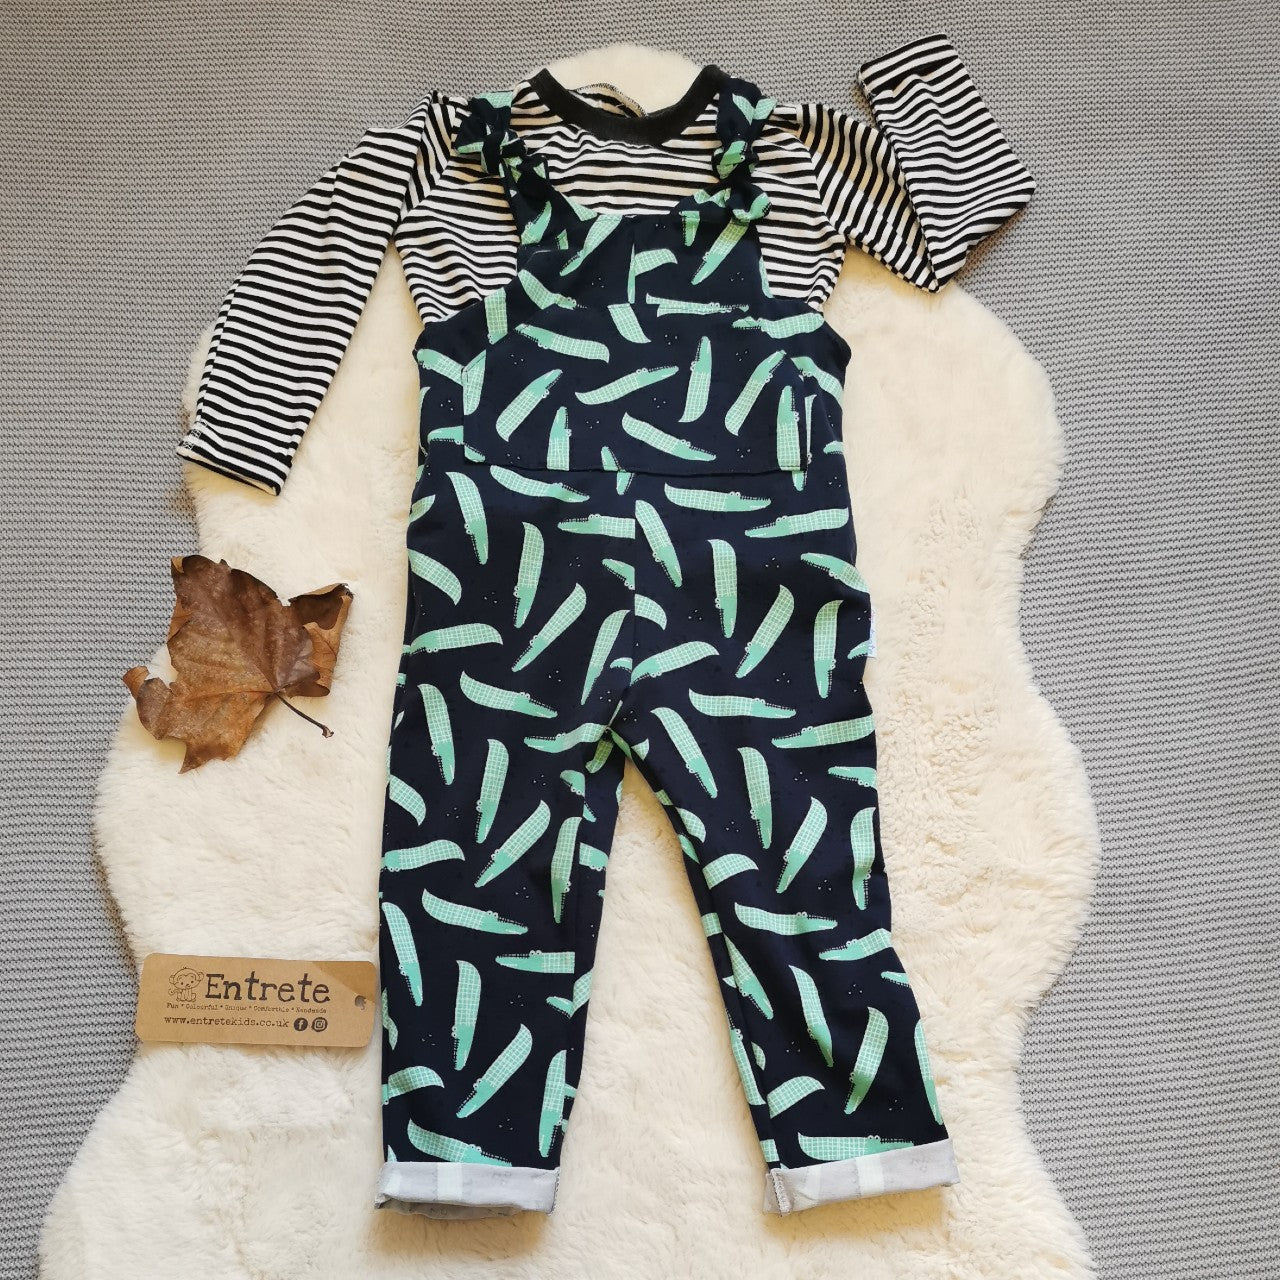 The amazingly fun navy crocodiles tie strap dungarees, shown with a monochrome striped top (sold separately).